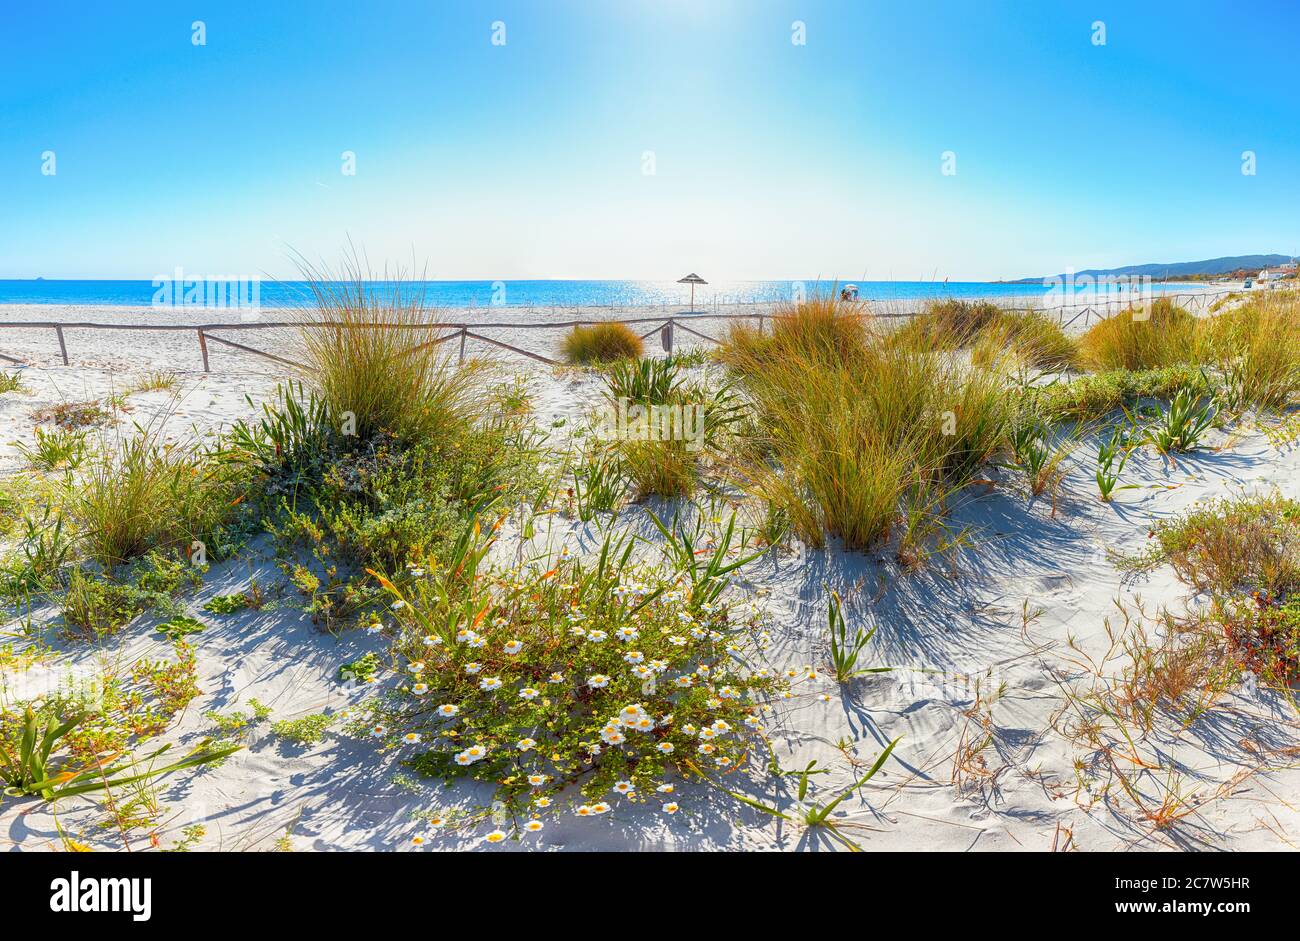 Landscape of grass and flowers in sand dunes on the beach La Cinta. Turquoise water and white sand. Location: San Teodoro, Olbia Tempio province, Sard Stock Photo